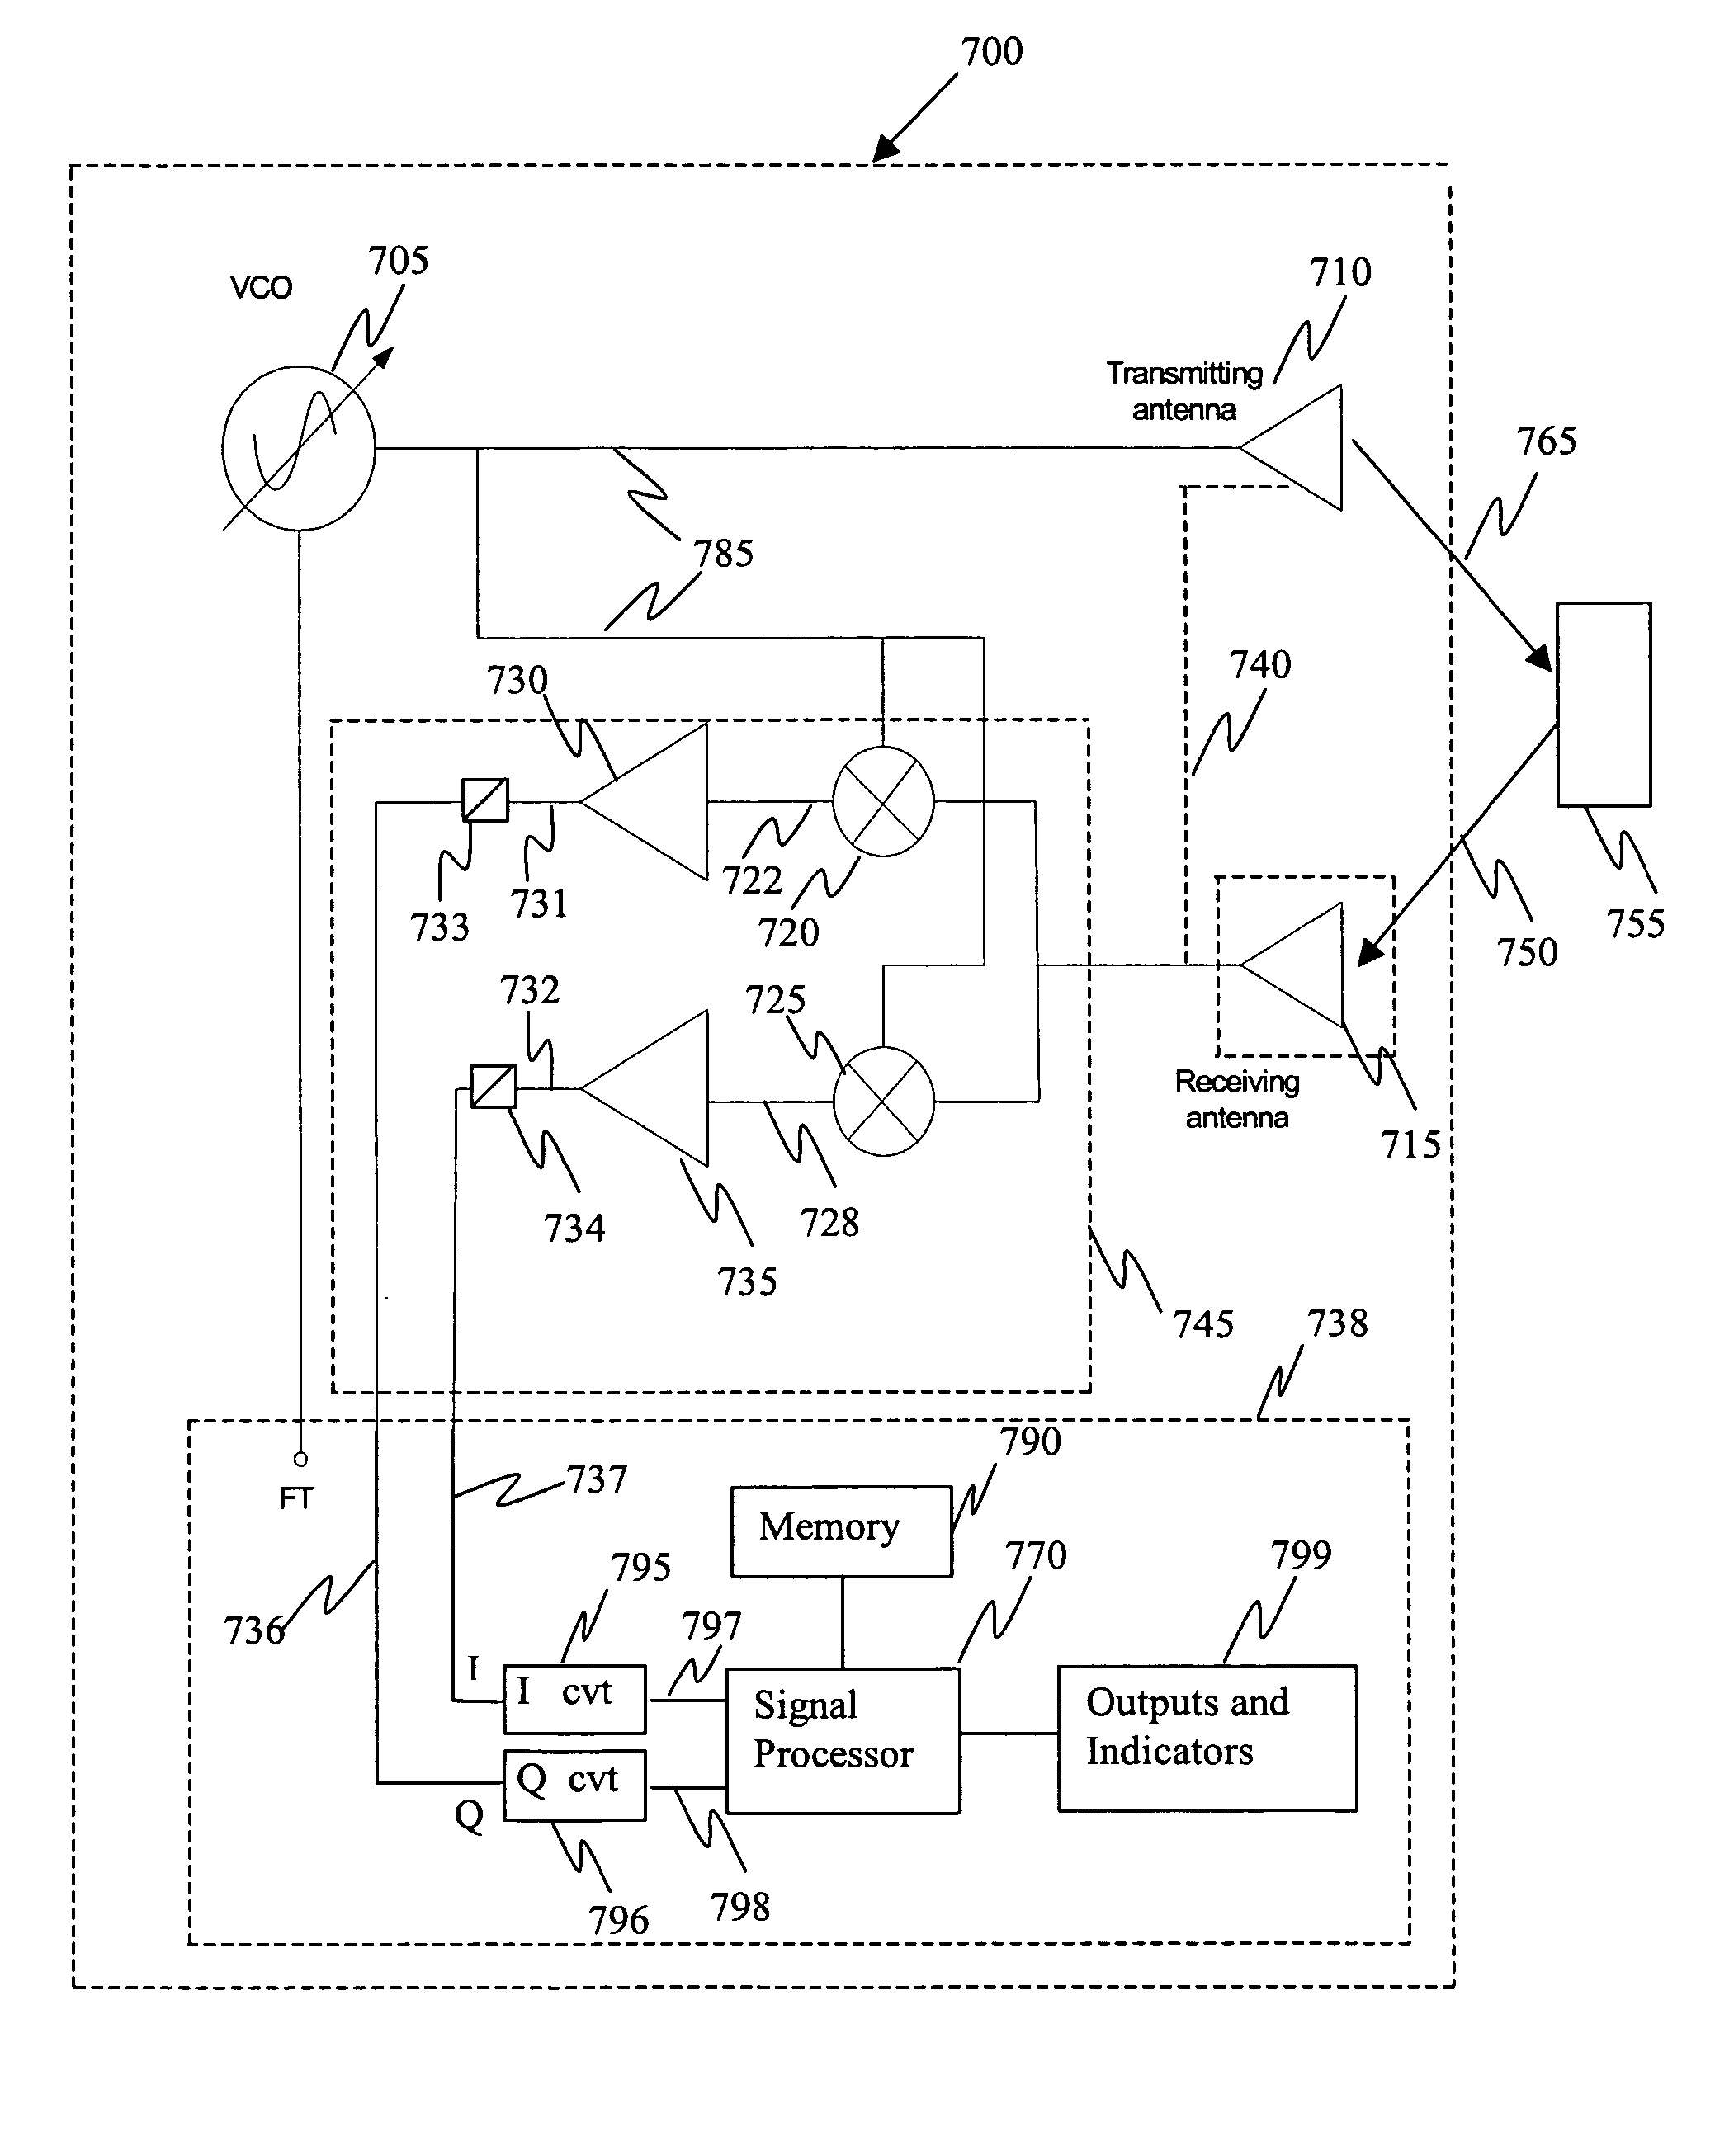 Detecting objects within a near-field of a frequency modulated continuous wave (FMCW) radar system